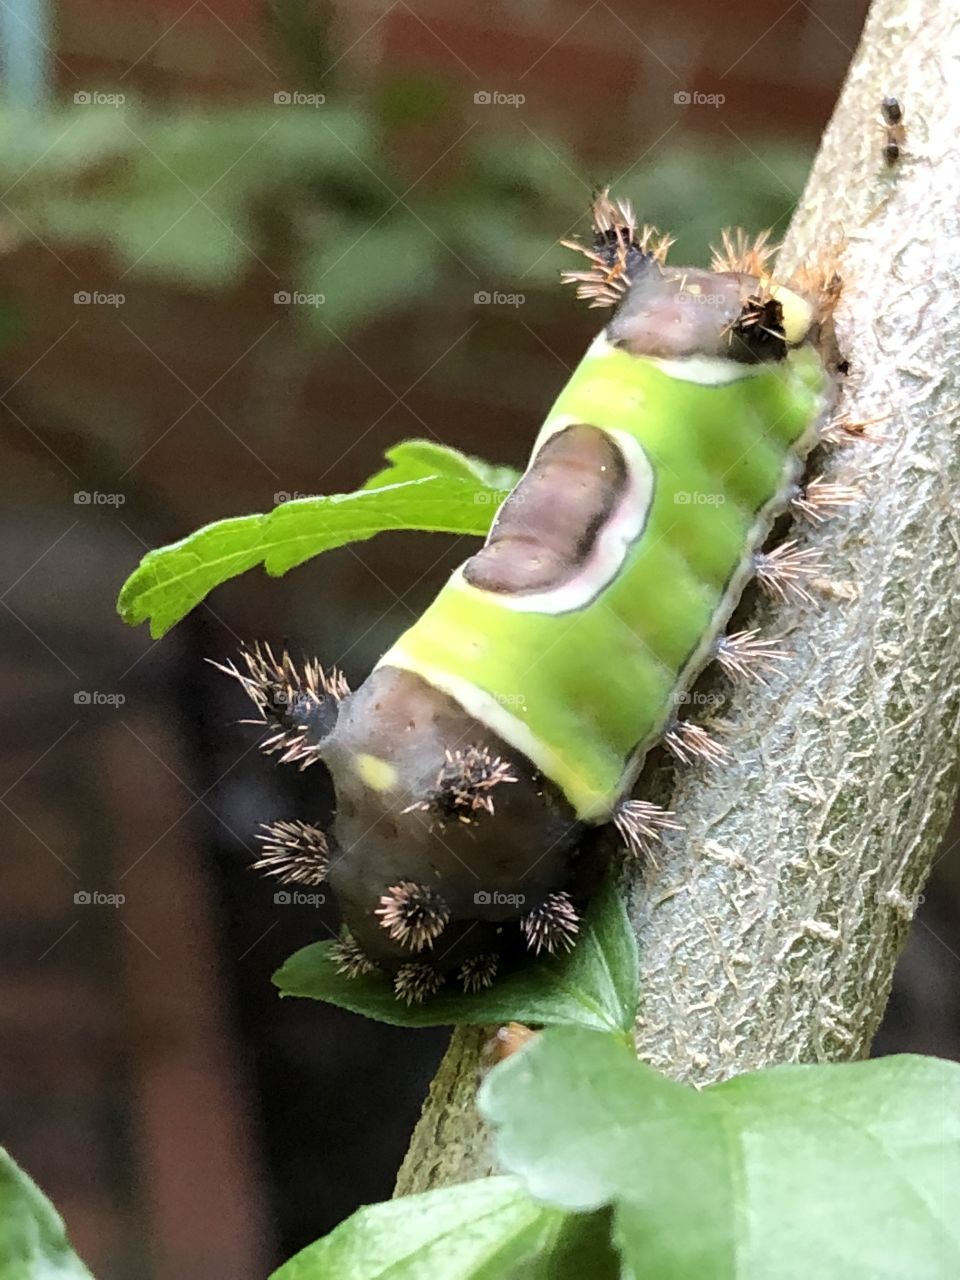 Toxic poison awaits the unwary who would touch the trigger hairs on this painful stinging Saddleback caterpillar.